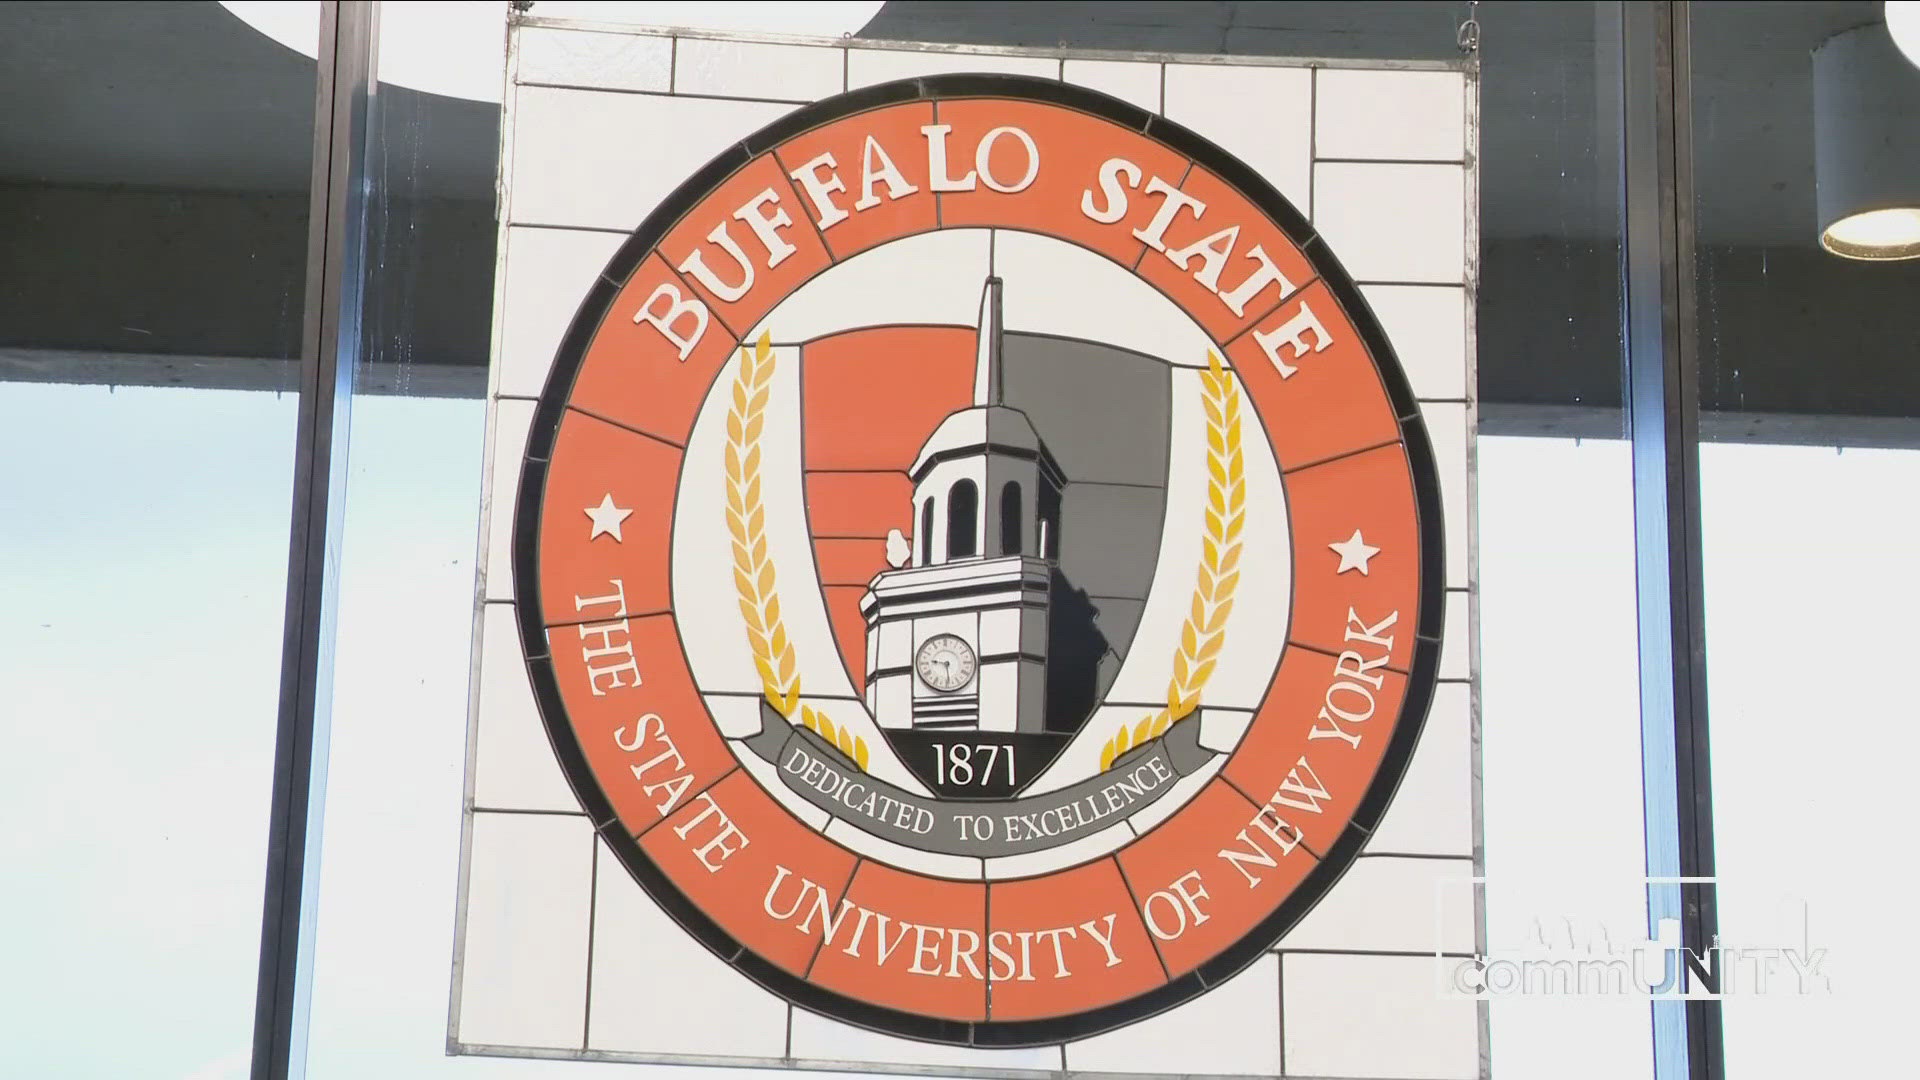 Buffalo State University will be cutting more than 30 programs in what it has said is an effort to "capitalize on the university’s academic strengths."